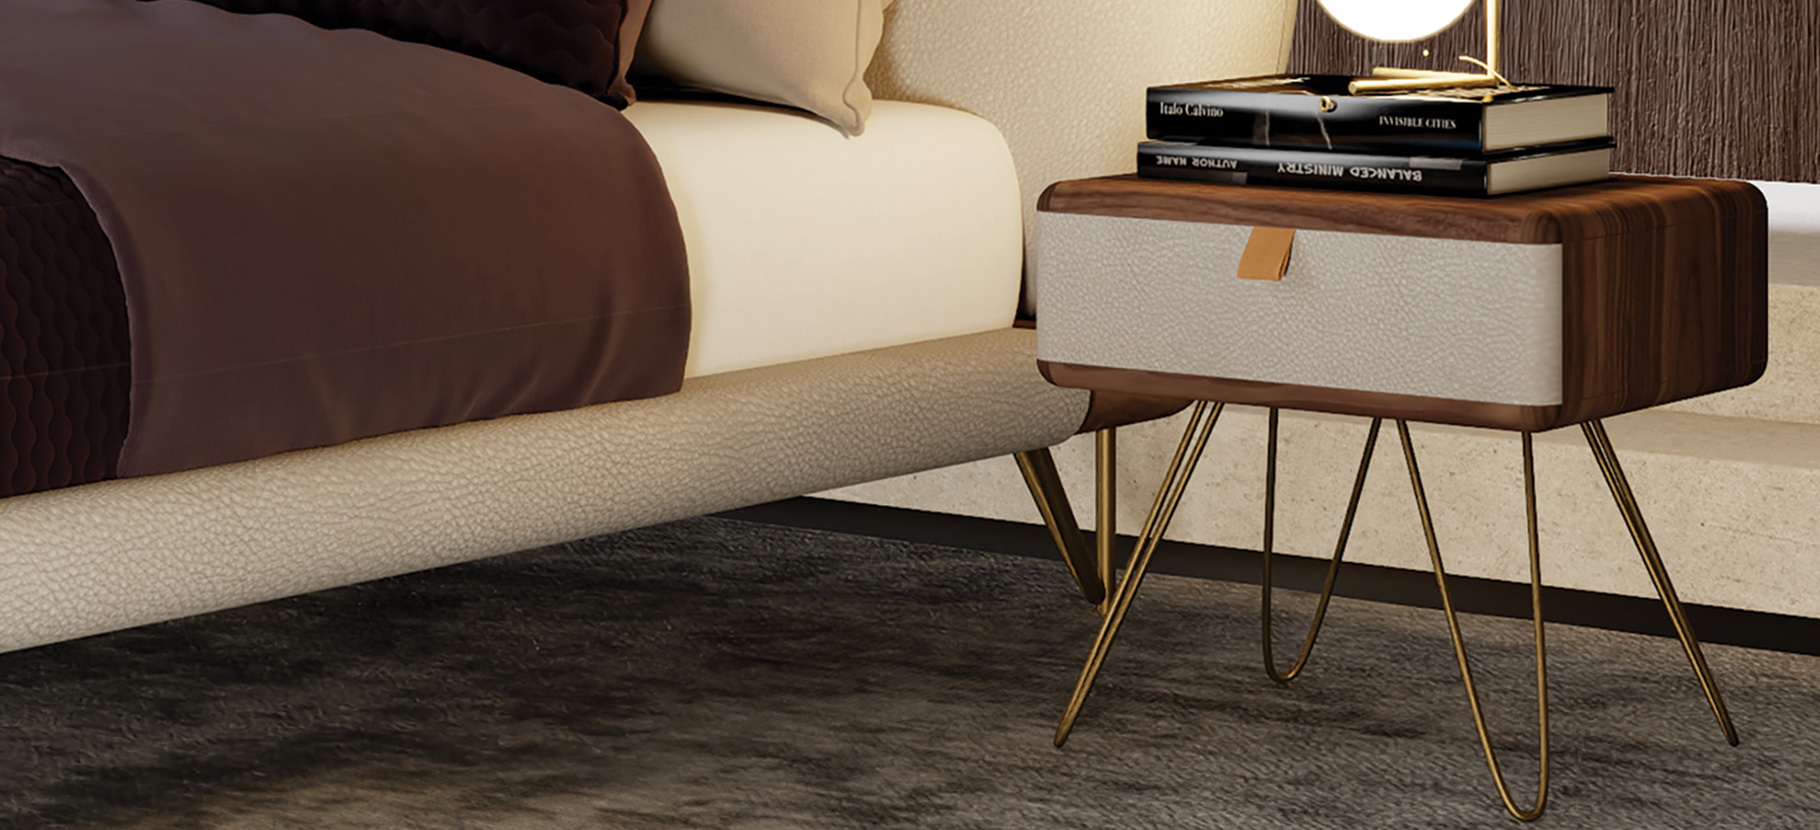 Encore - Paradigma - Side table and consolle collection